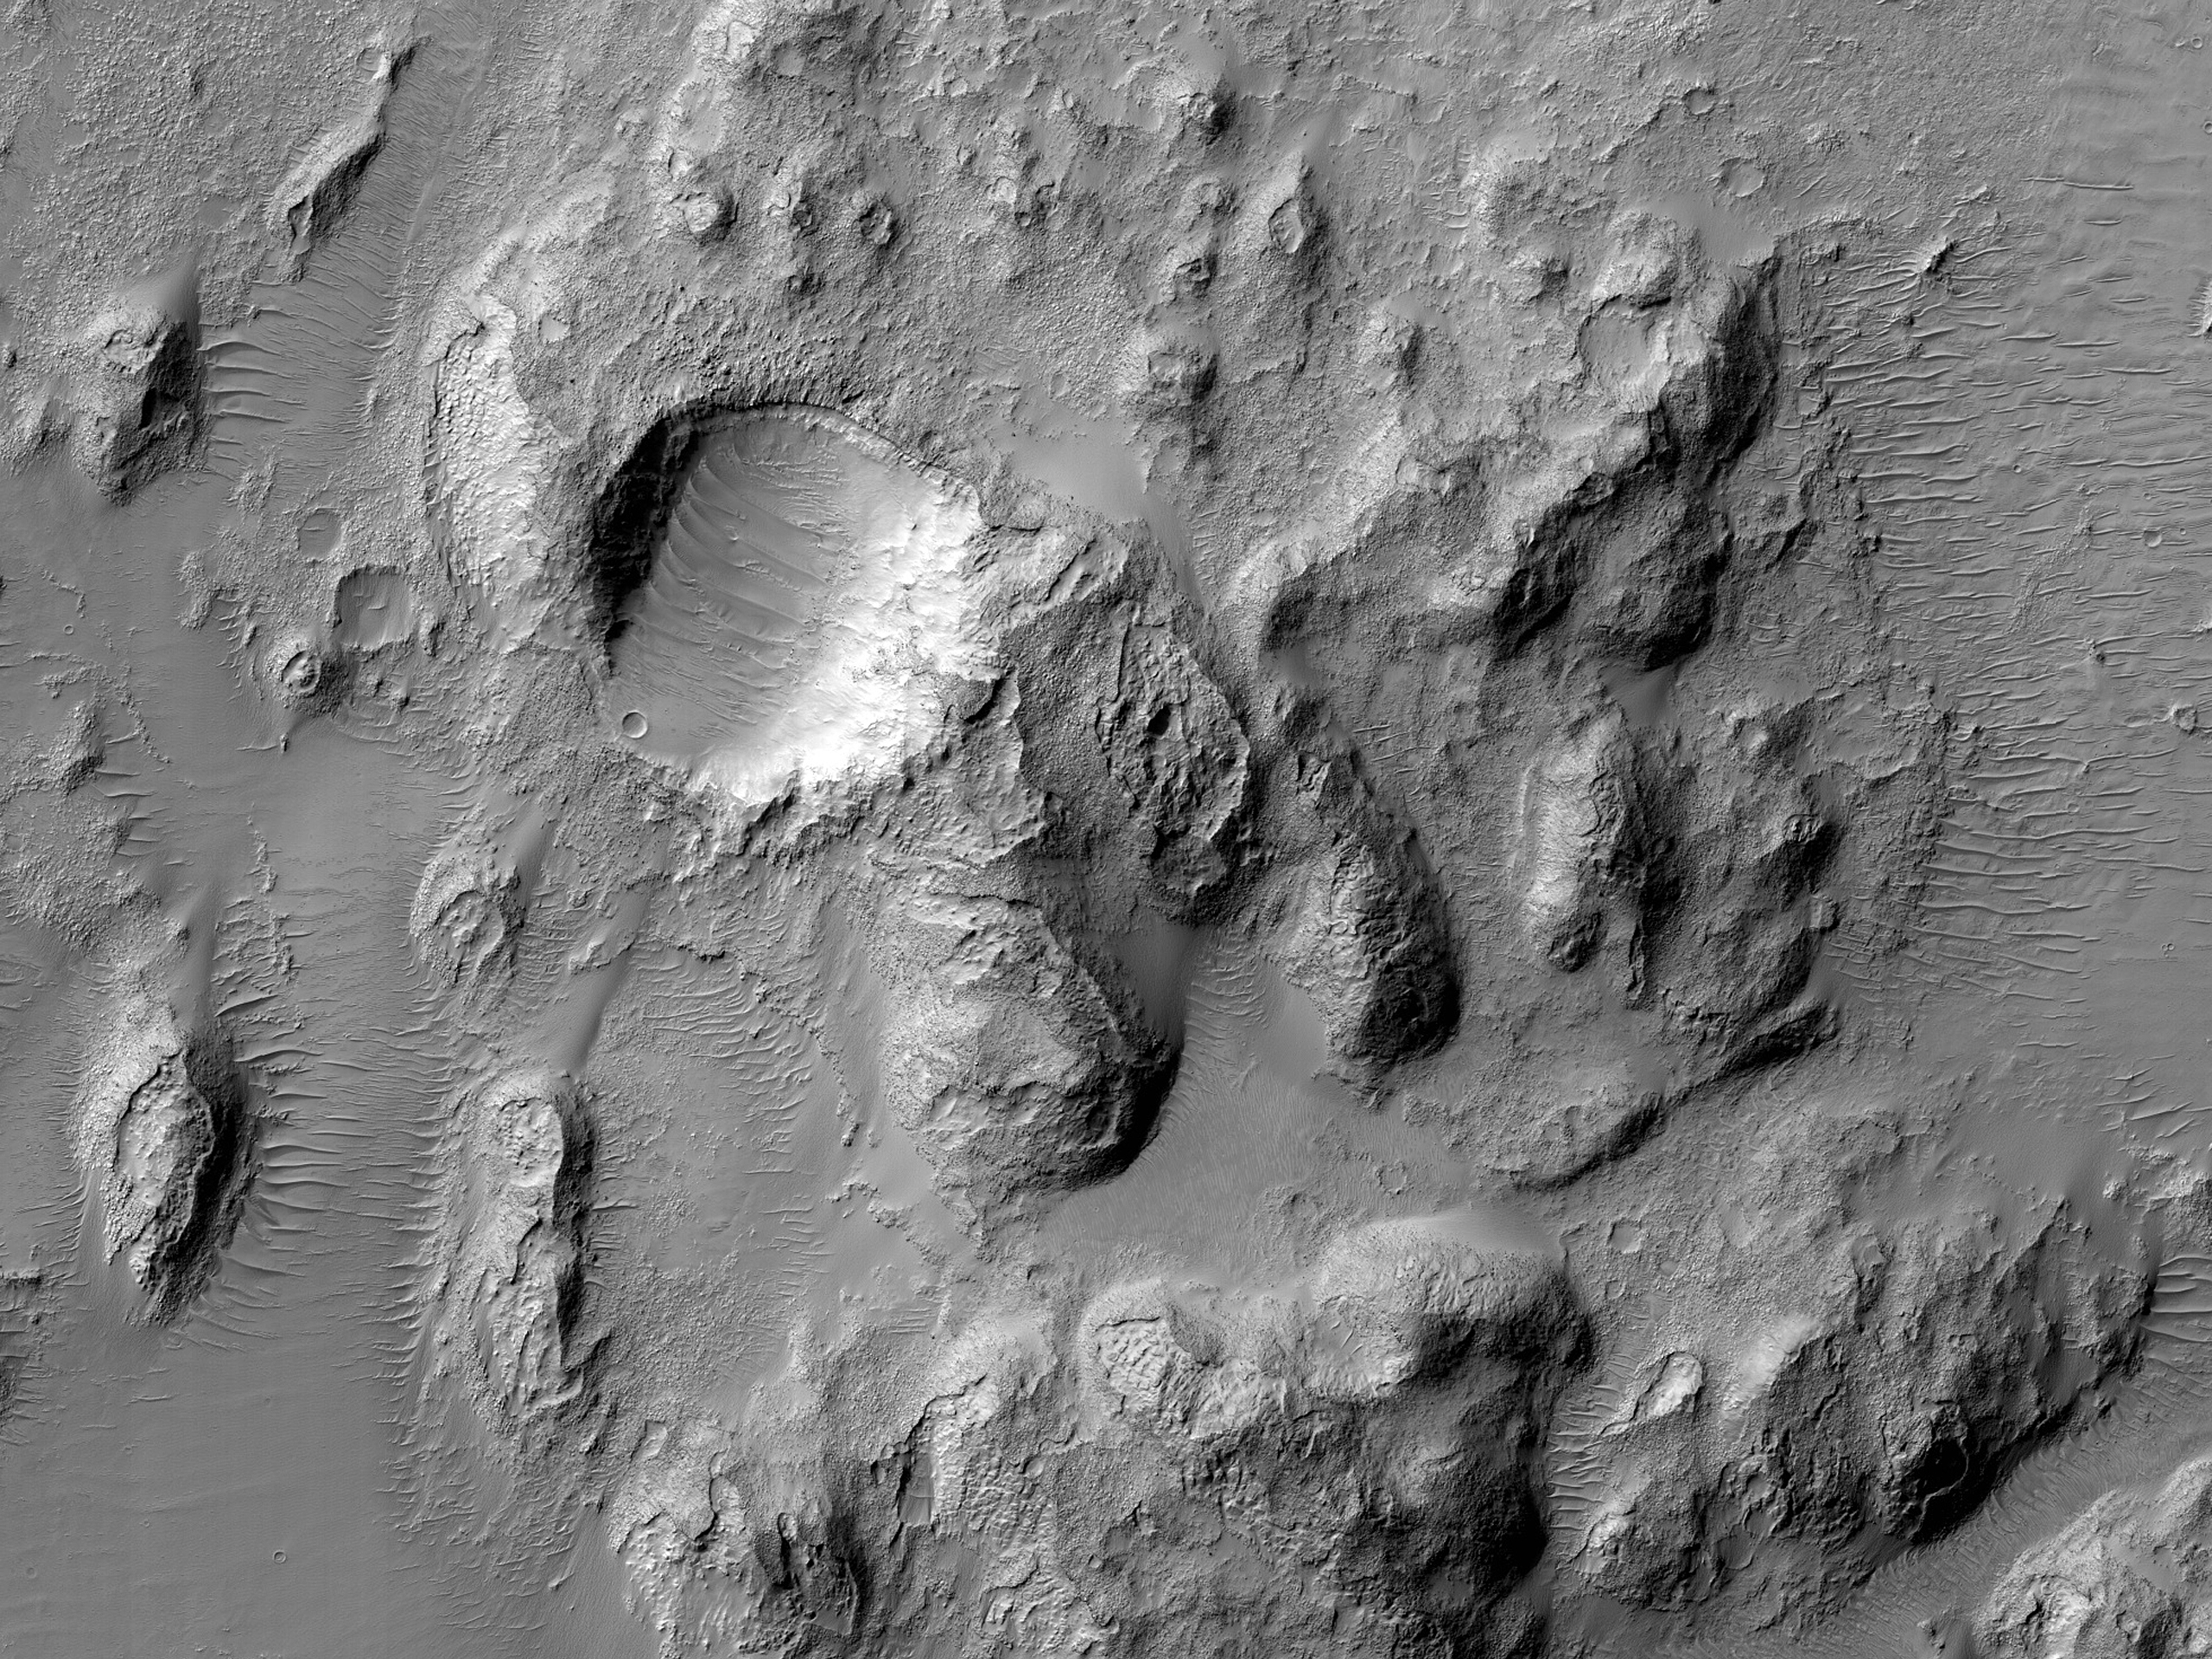 Holden Crater Impact Ejecta